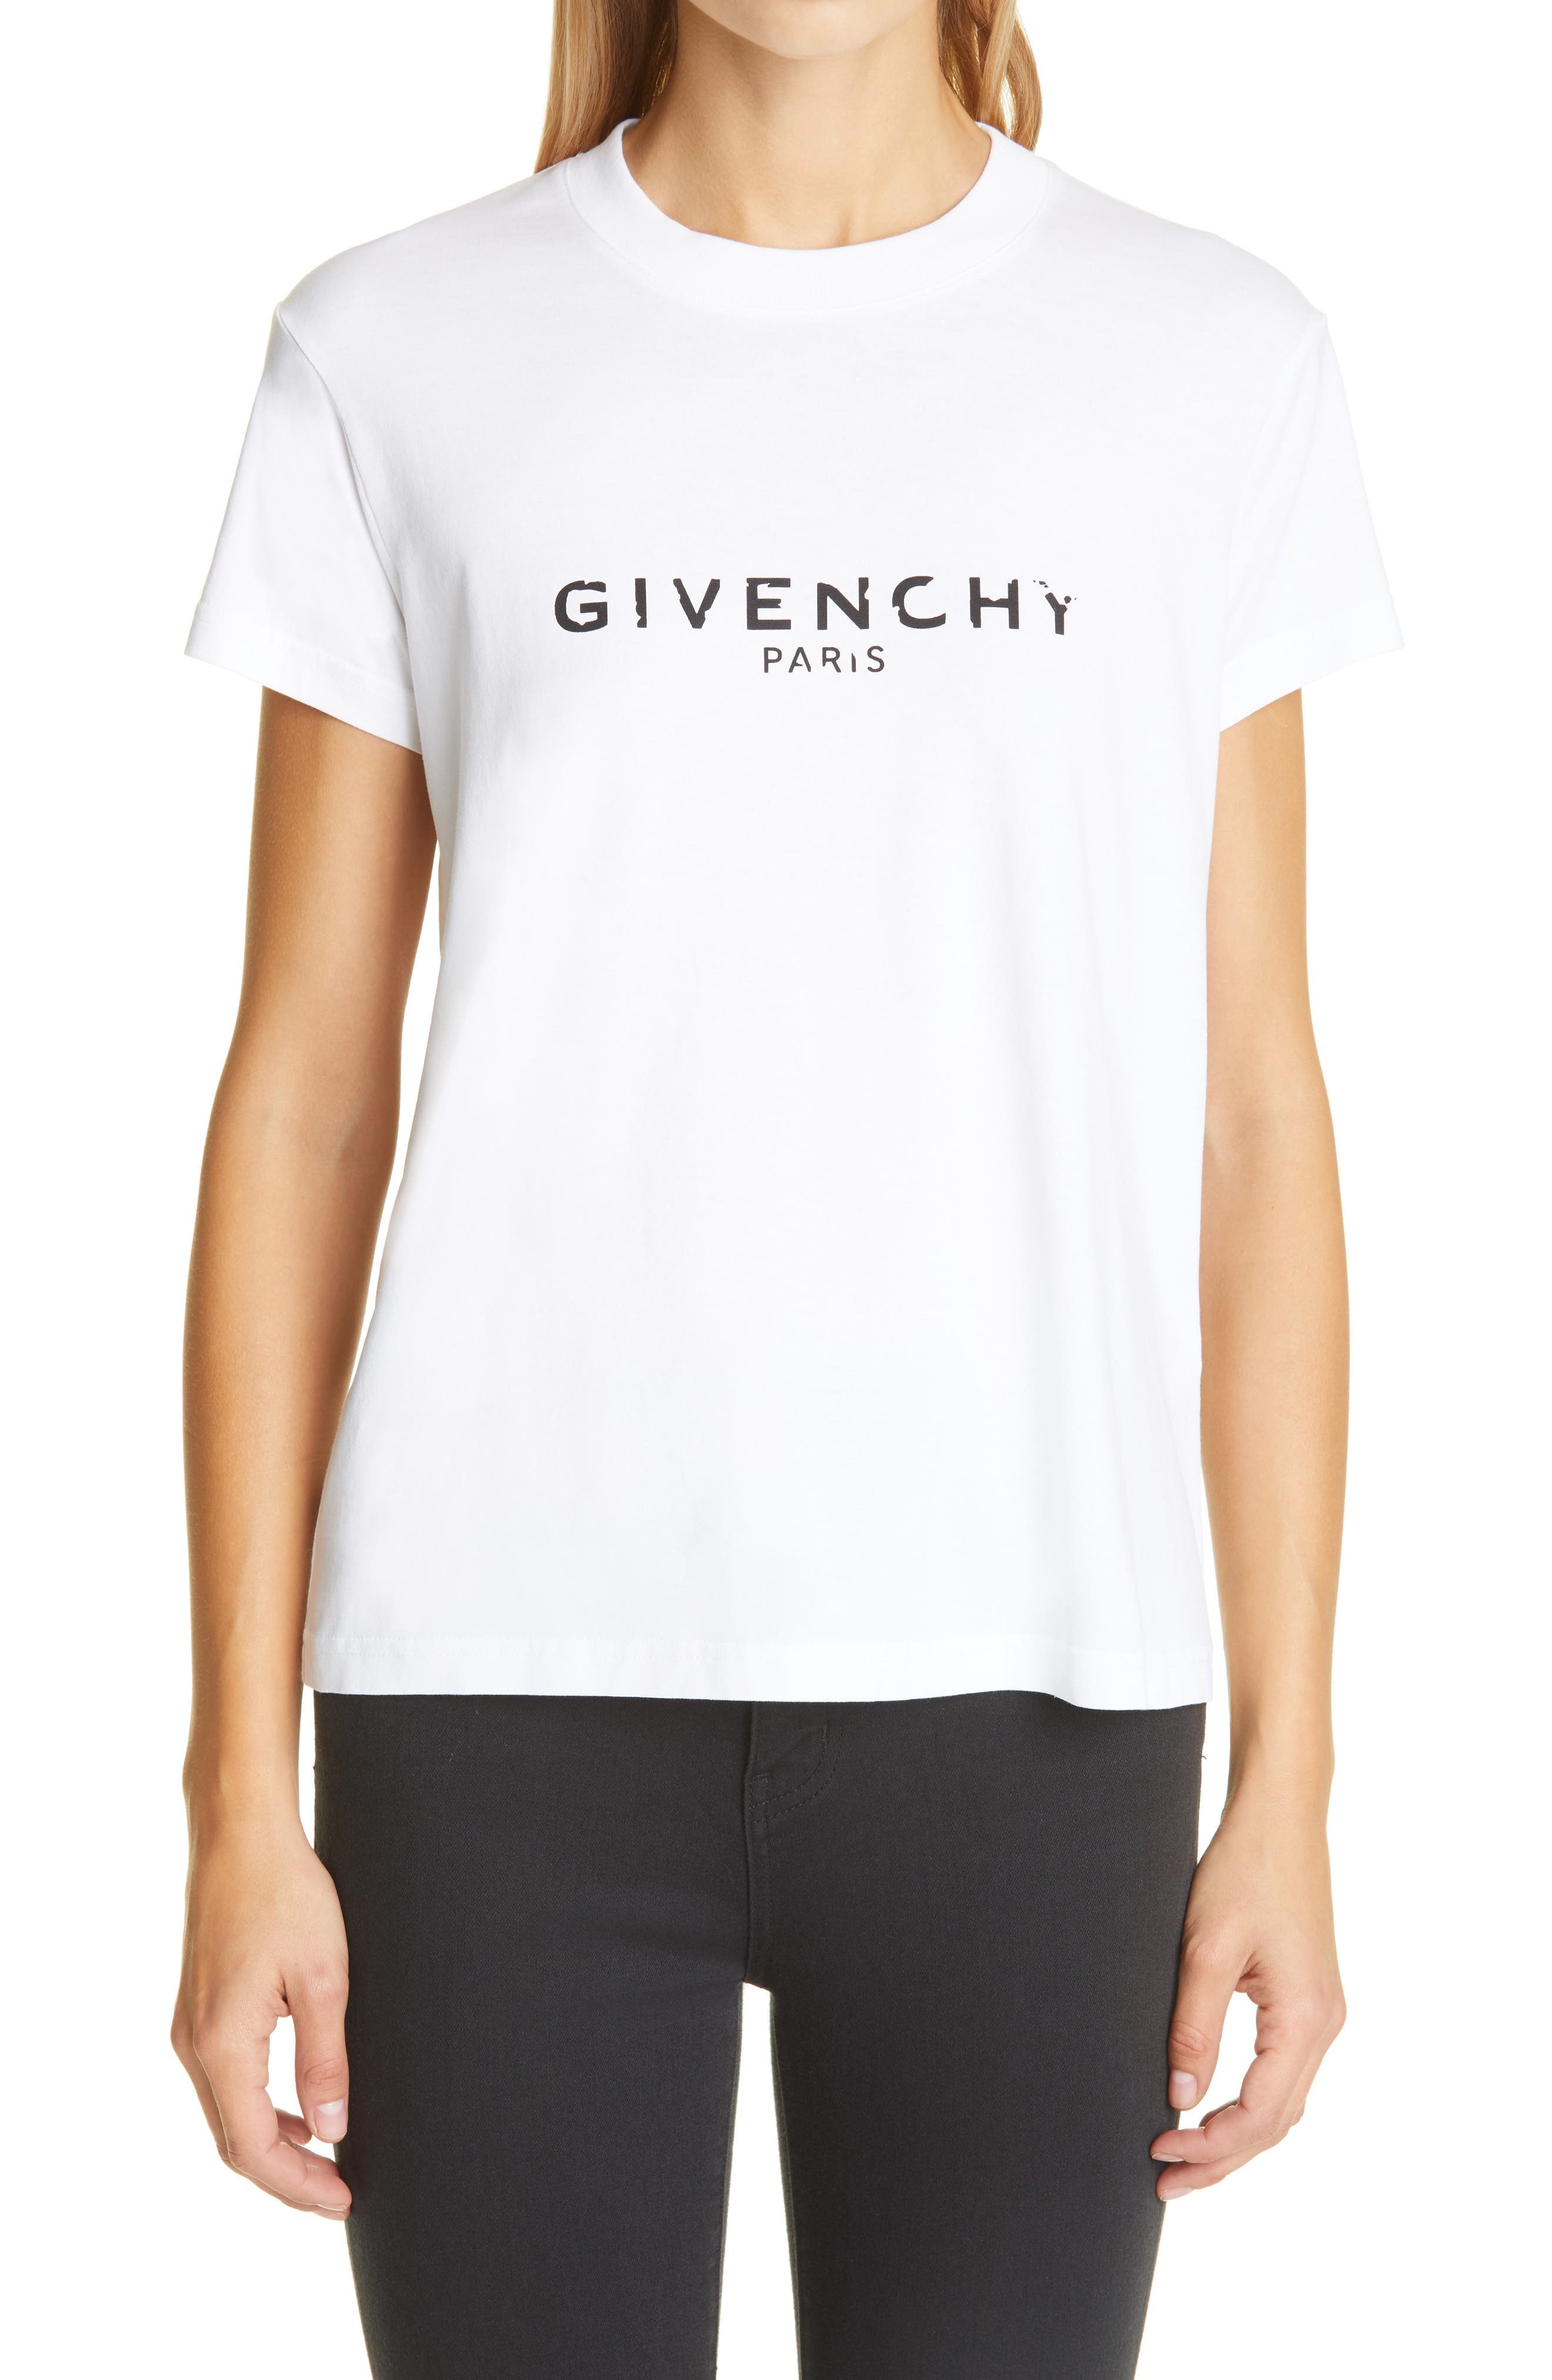 givenchy womens top